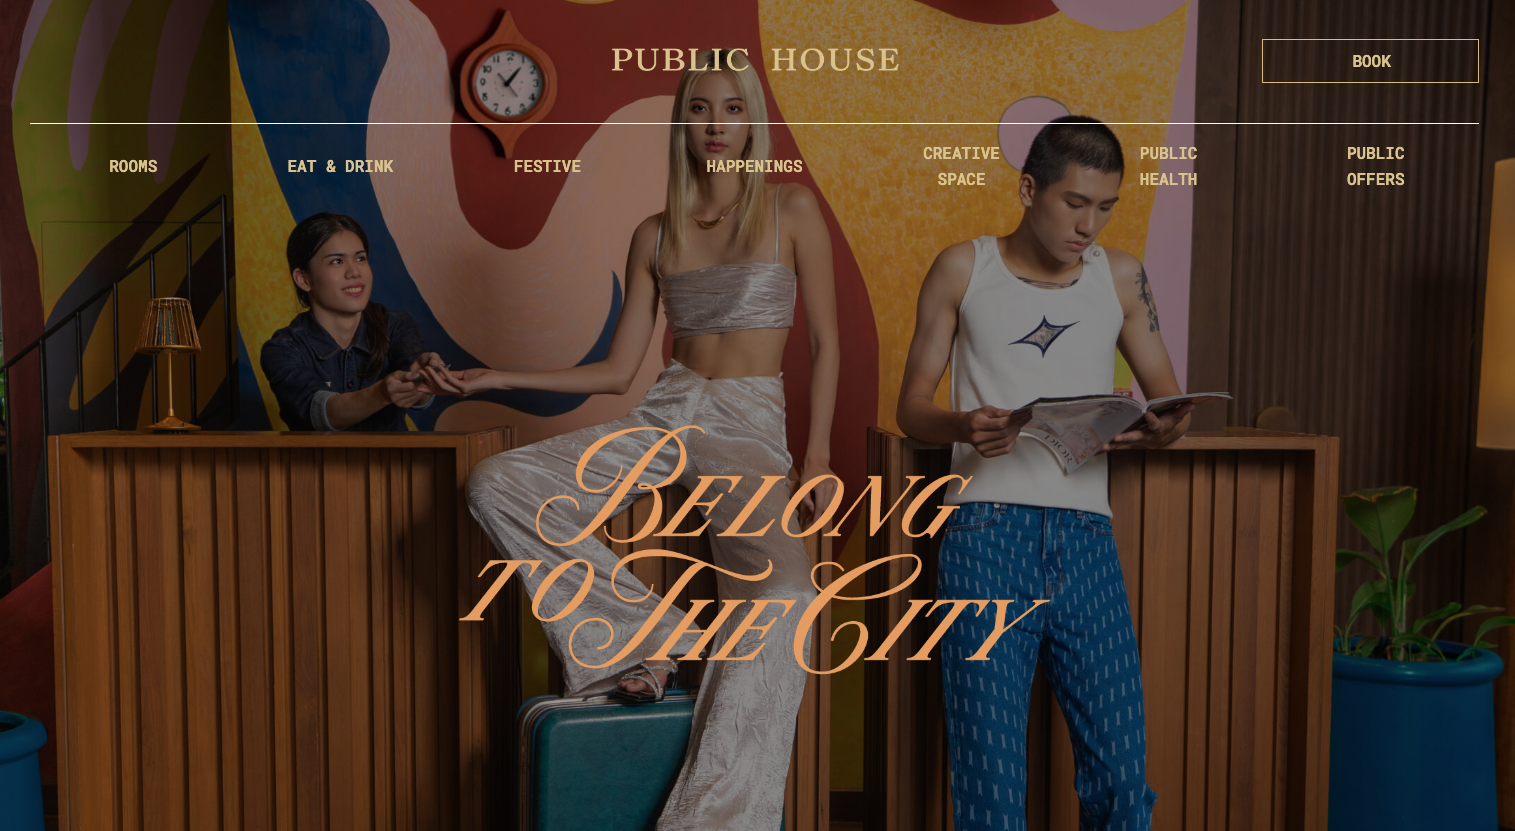 20 Blog Posts for Public House Hotel